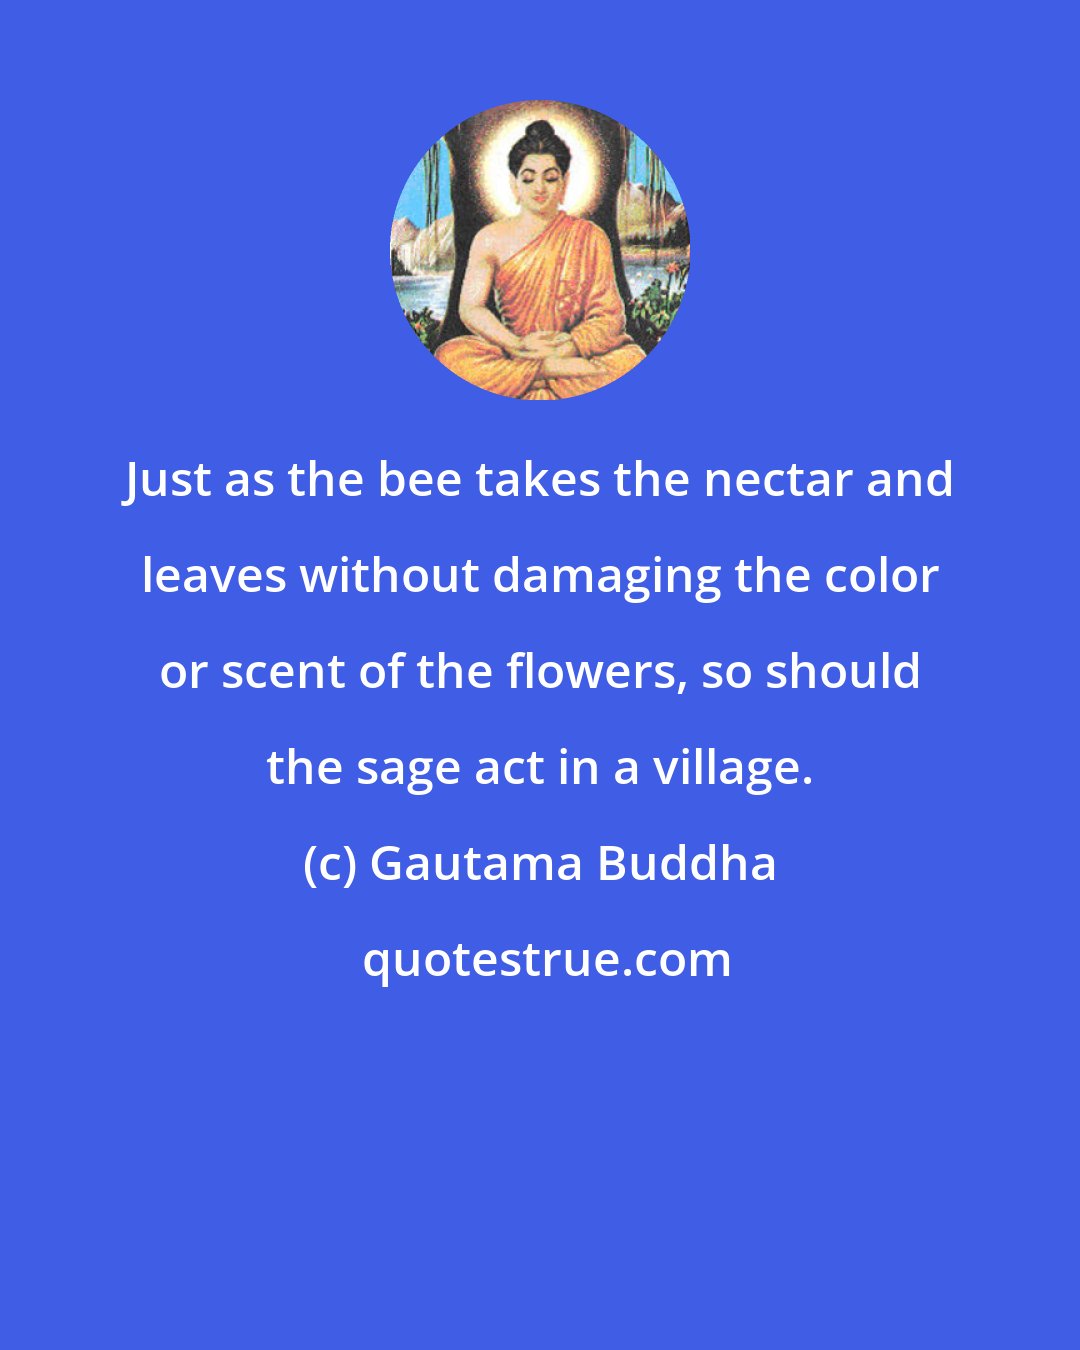 Gautama Buddha: Just as the bee takes the nectar and leaves without damaging the color or scent of the flowers, so should the sage act in a village.